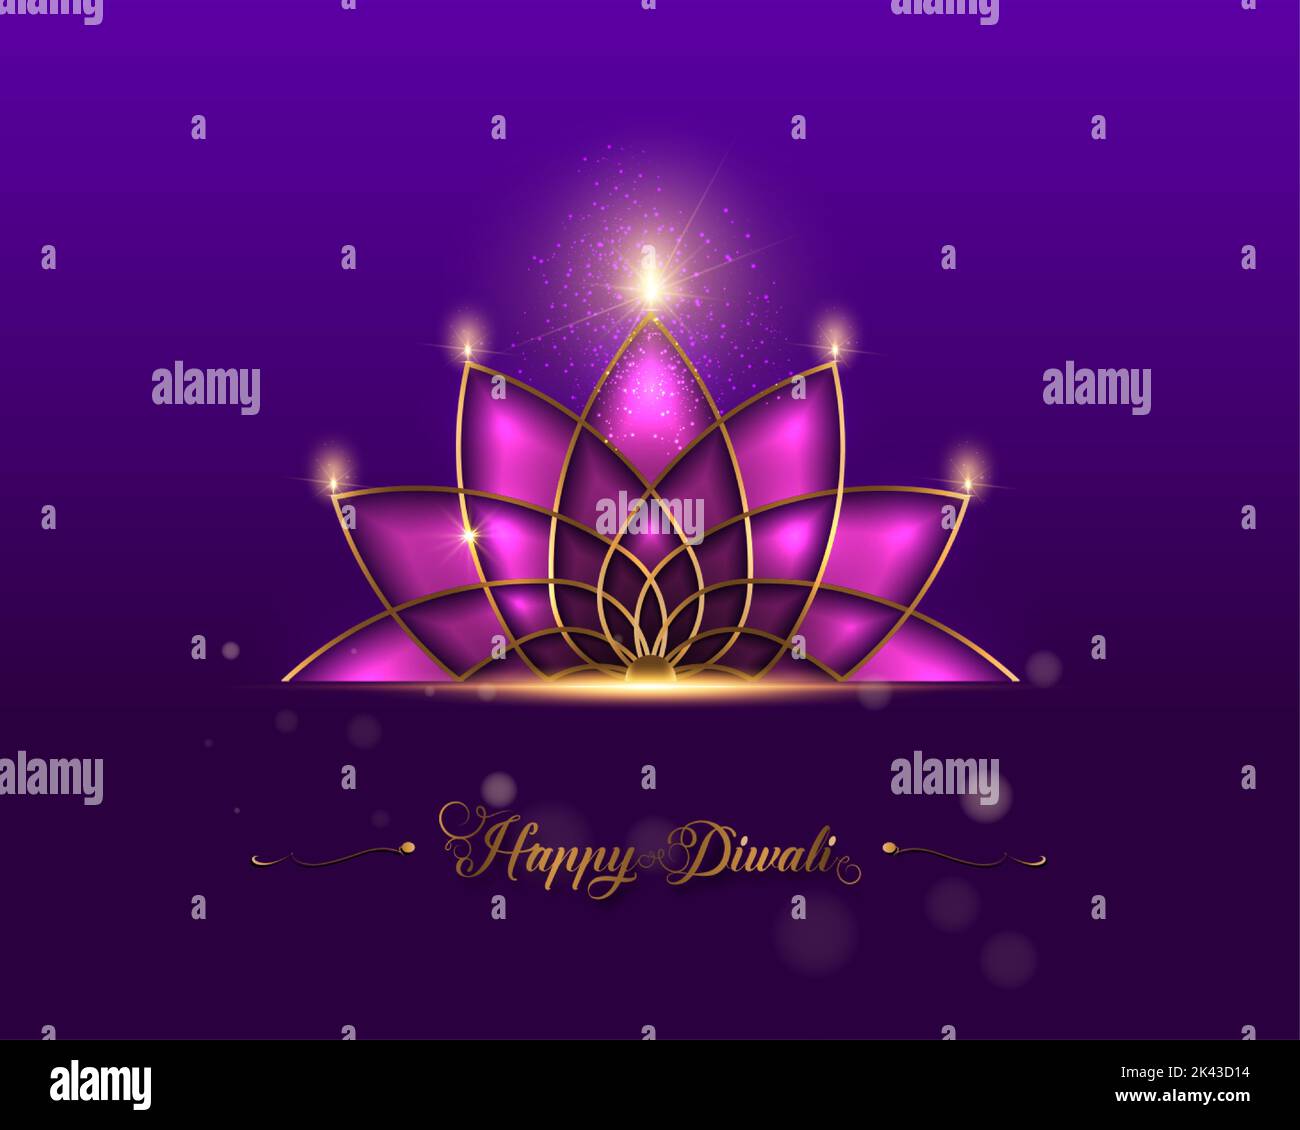 Happy Diwali Festival of Lights India Celebration colorful template. Graphic banner design of Indian Lotus Diya Oil Lamps, Modern Design Stock Vector